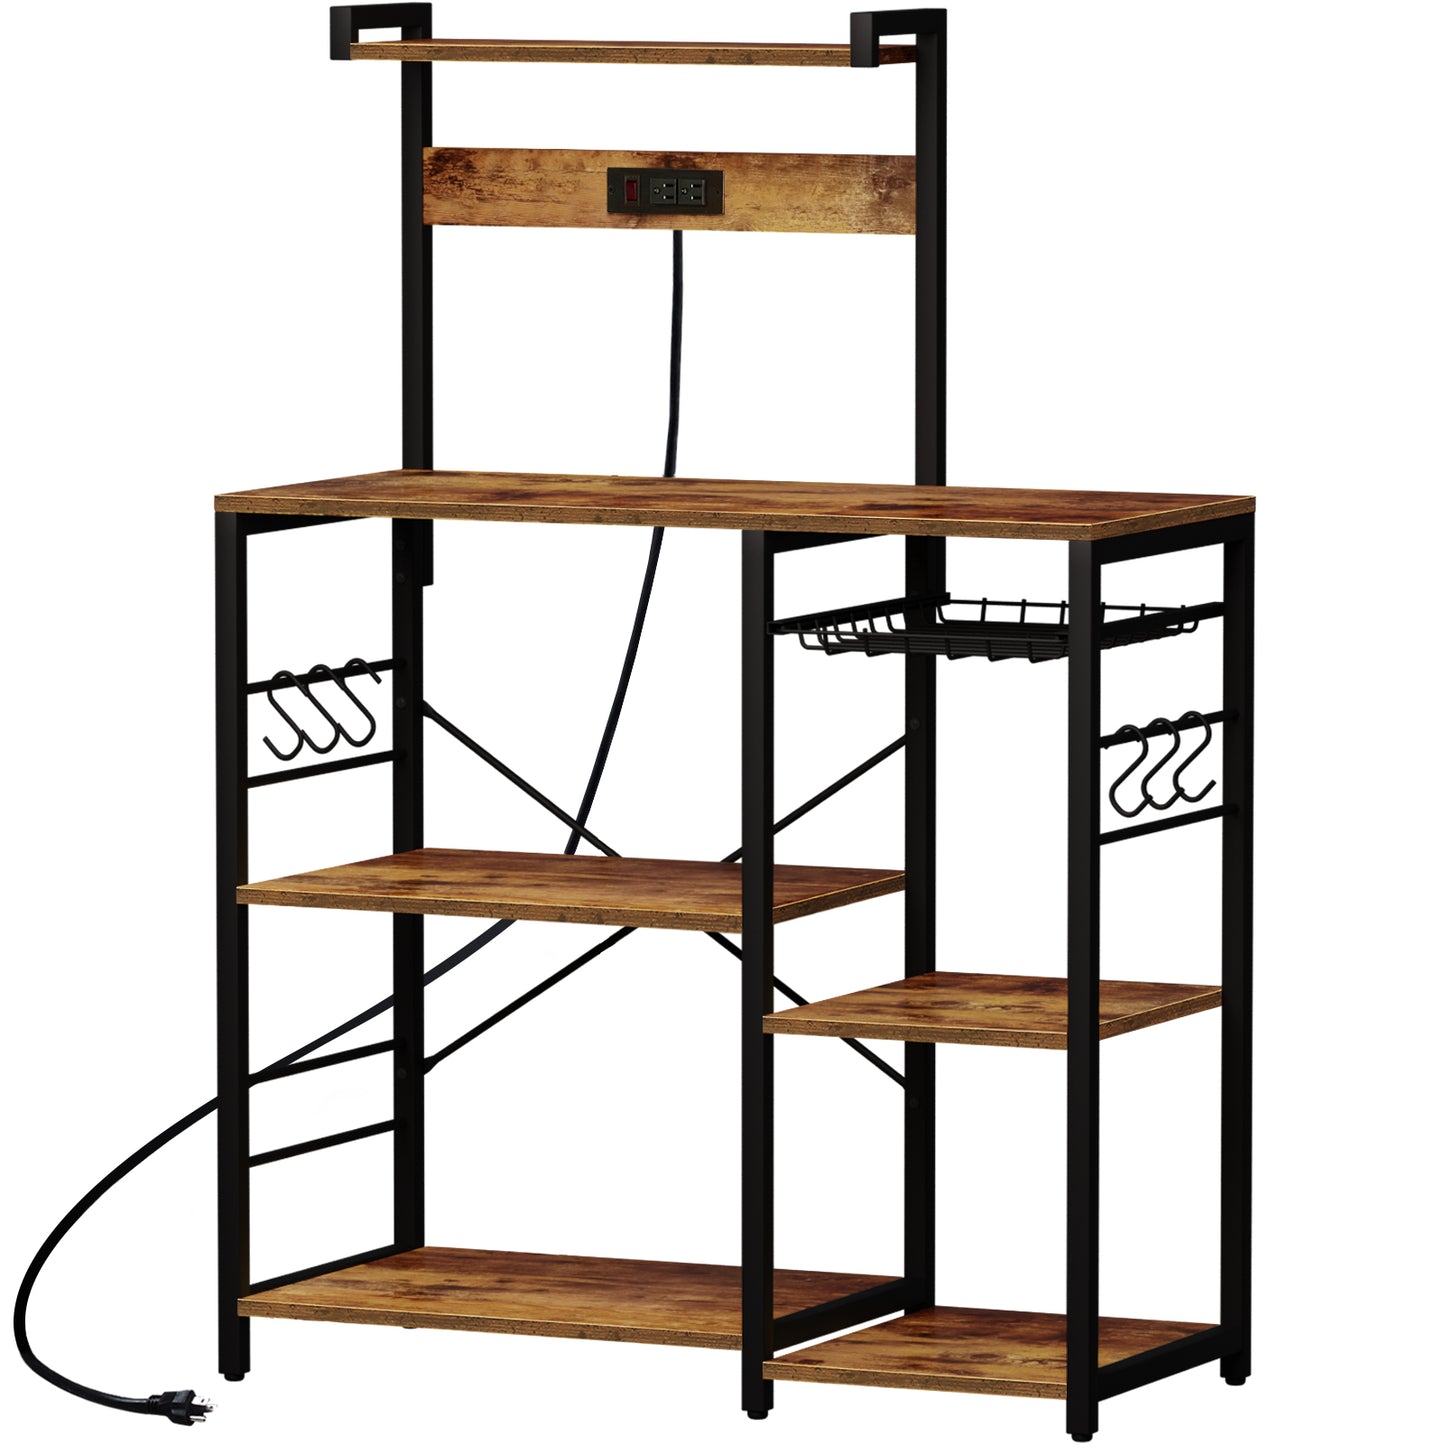 SUPERJARE Kitchen Baker’s Rack with Power Strip, 80919FC